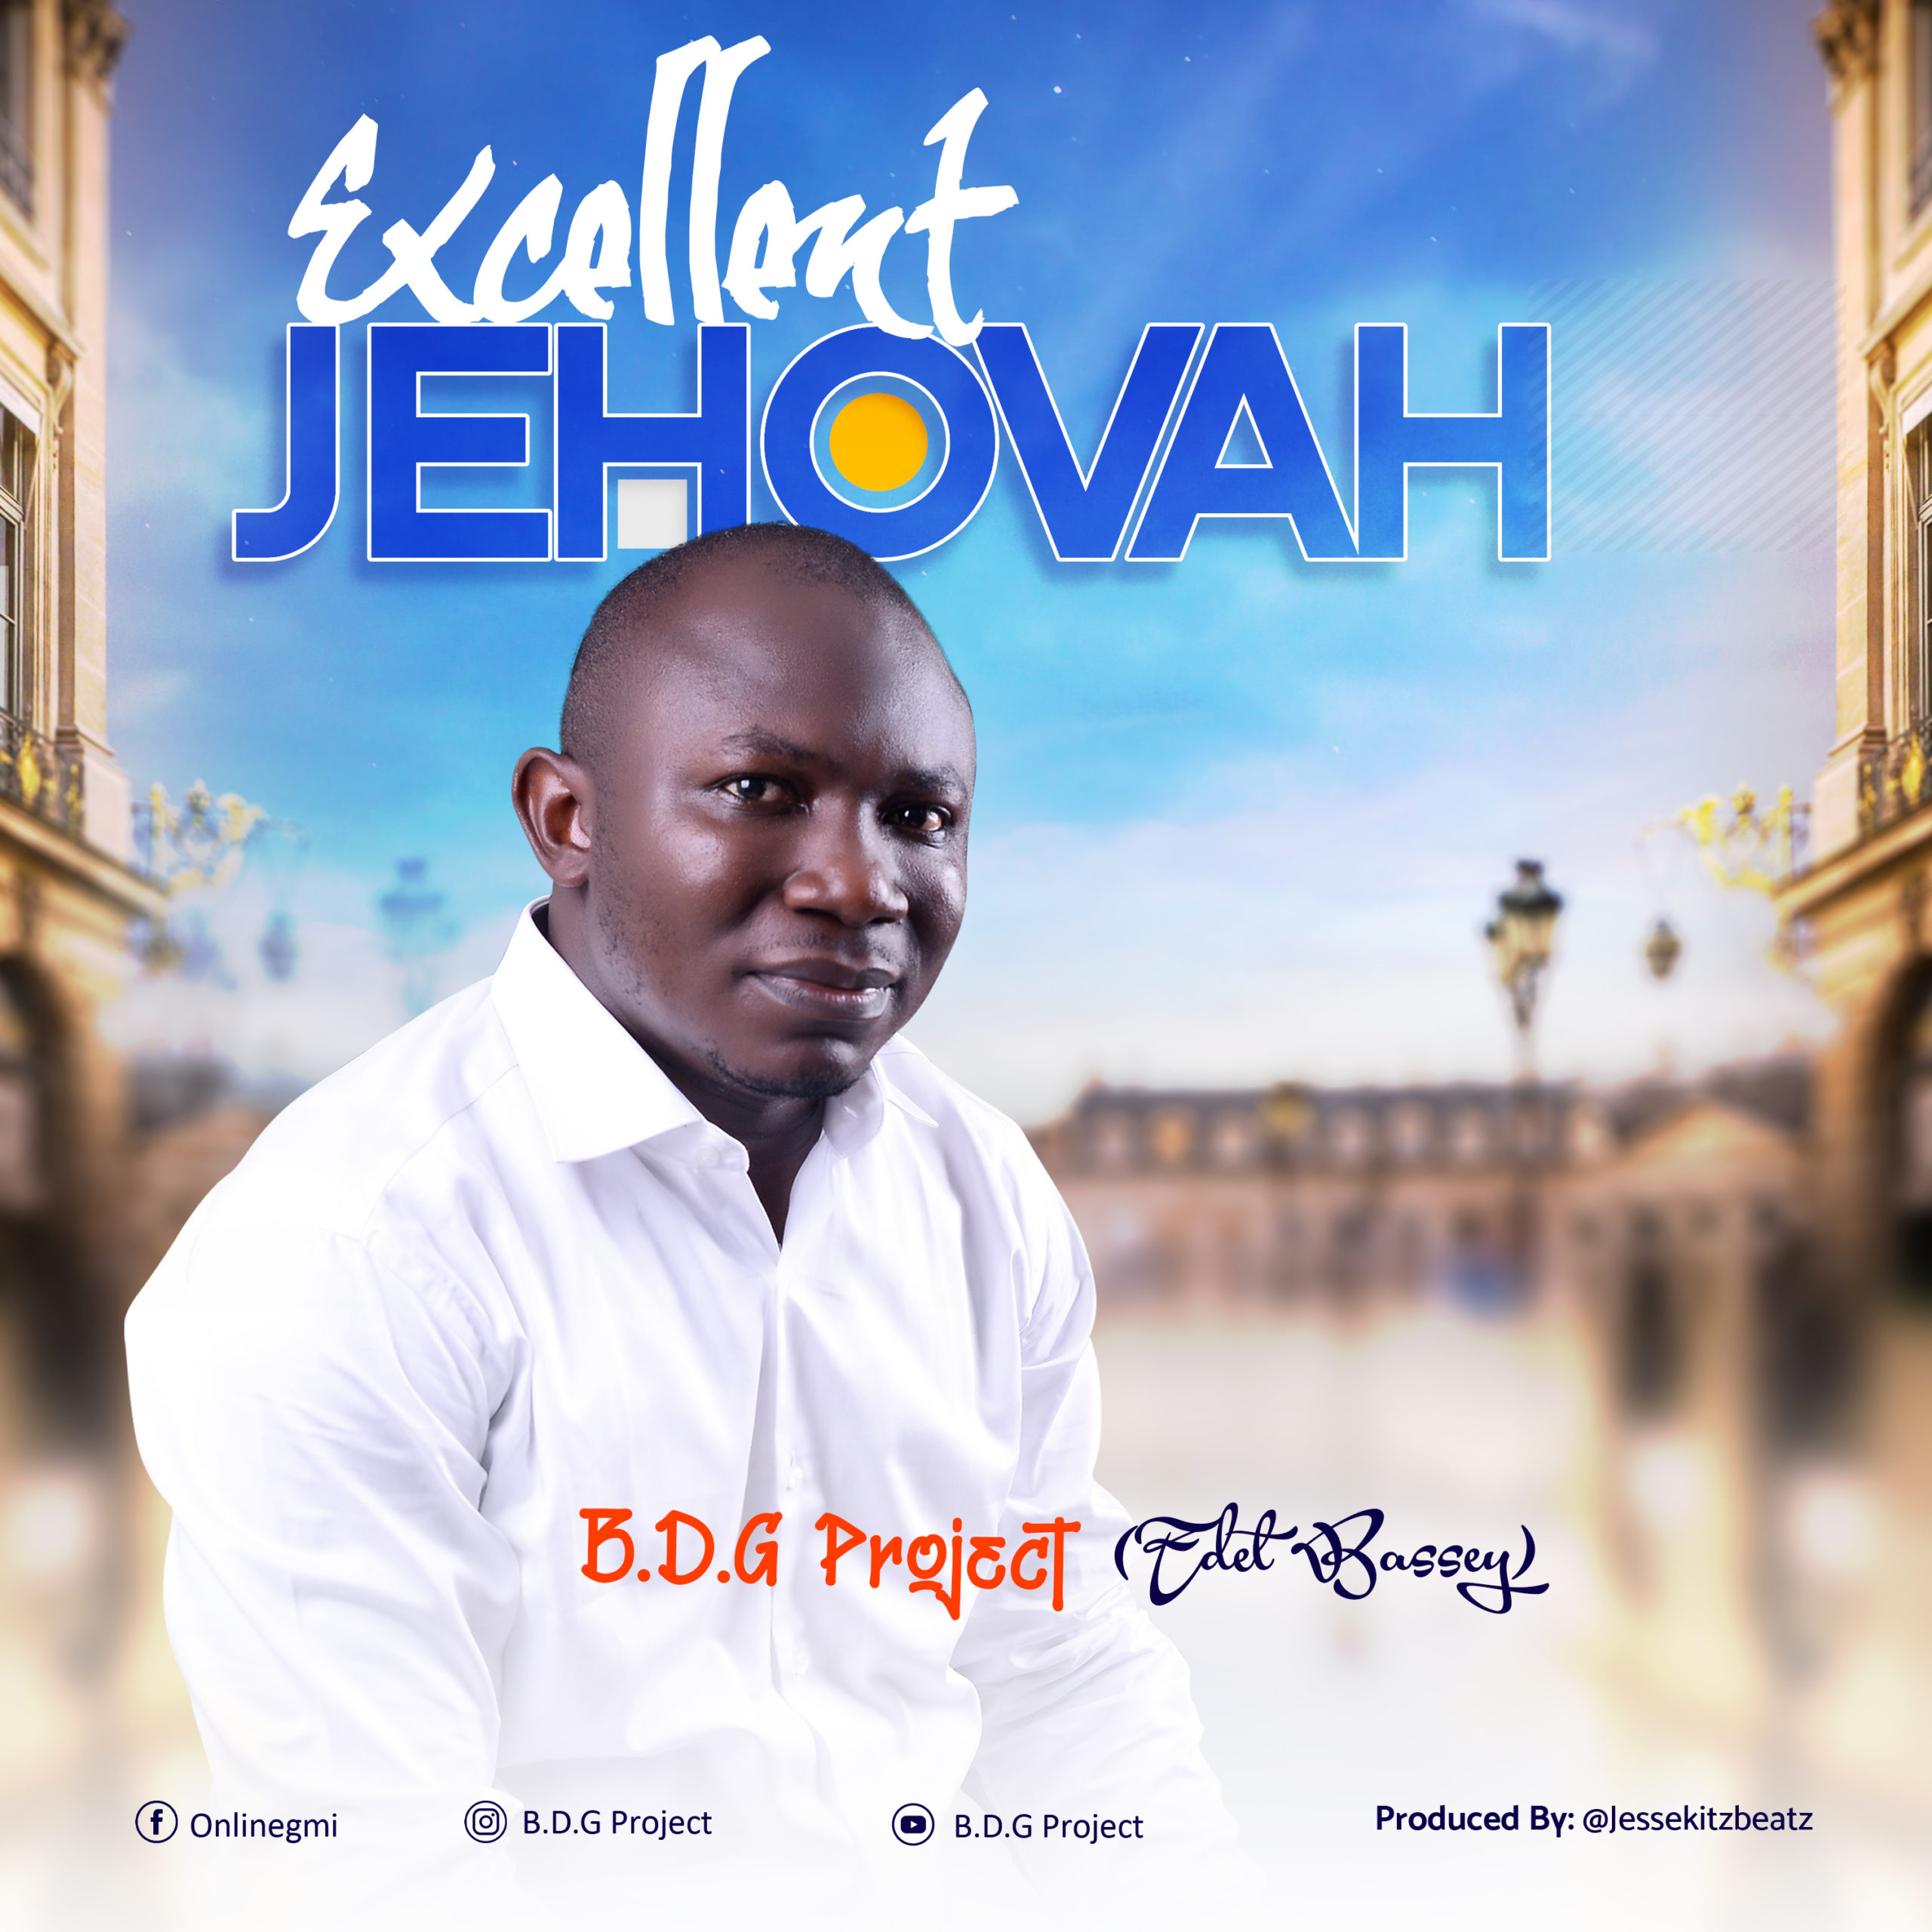 DOWNLOAD Music: B.D.G-project (Edet bassey)  - Excellent JEHOVAH